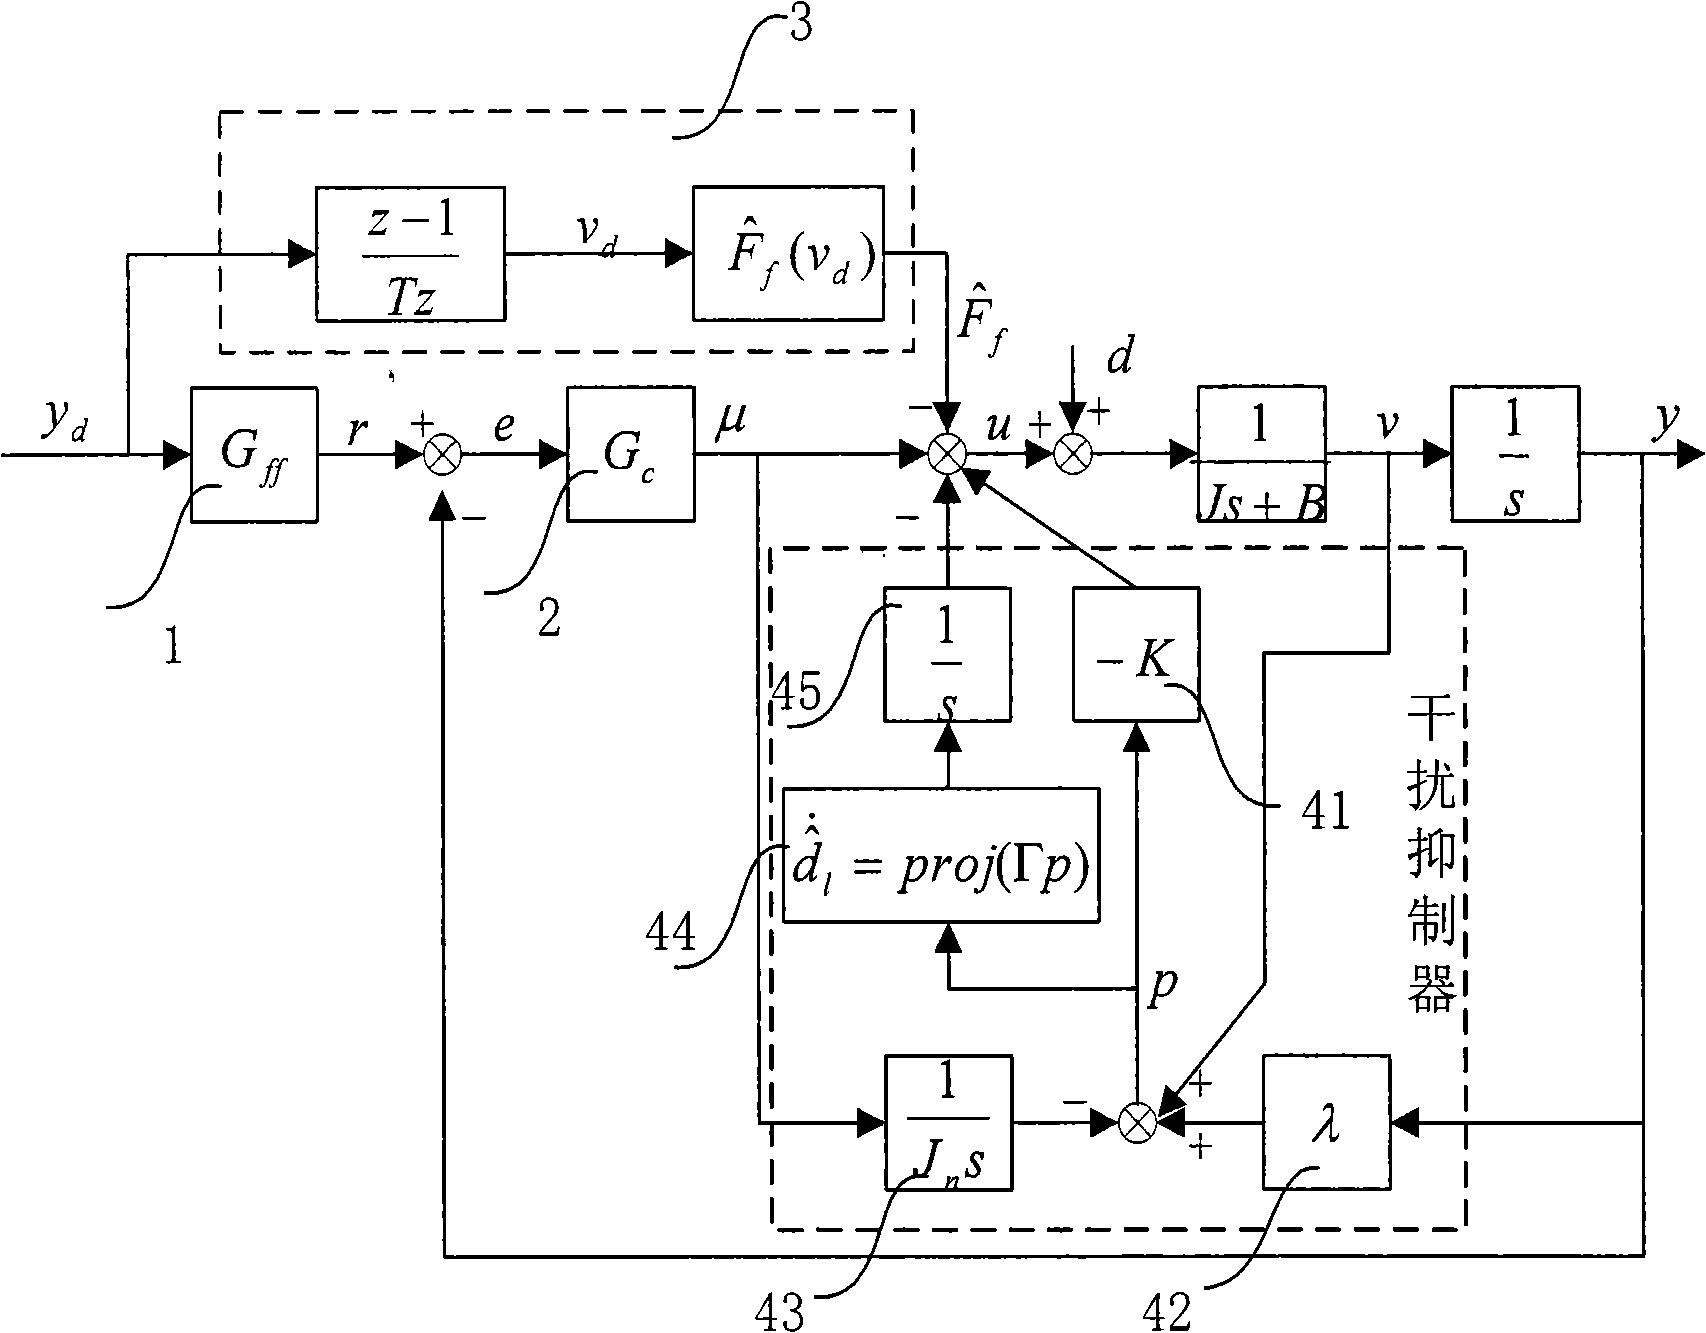 Self-adaptive controllers and method